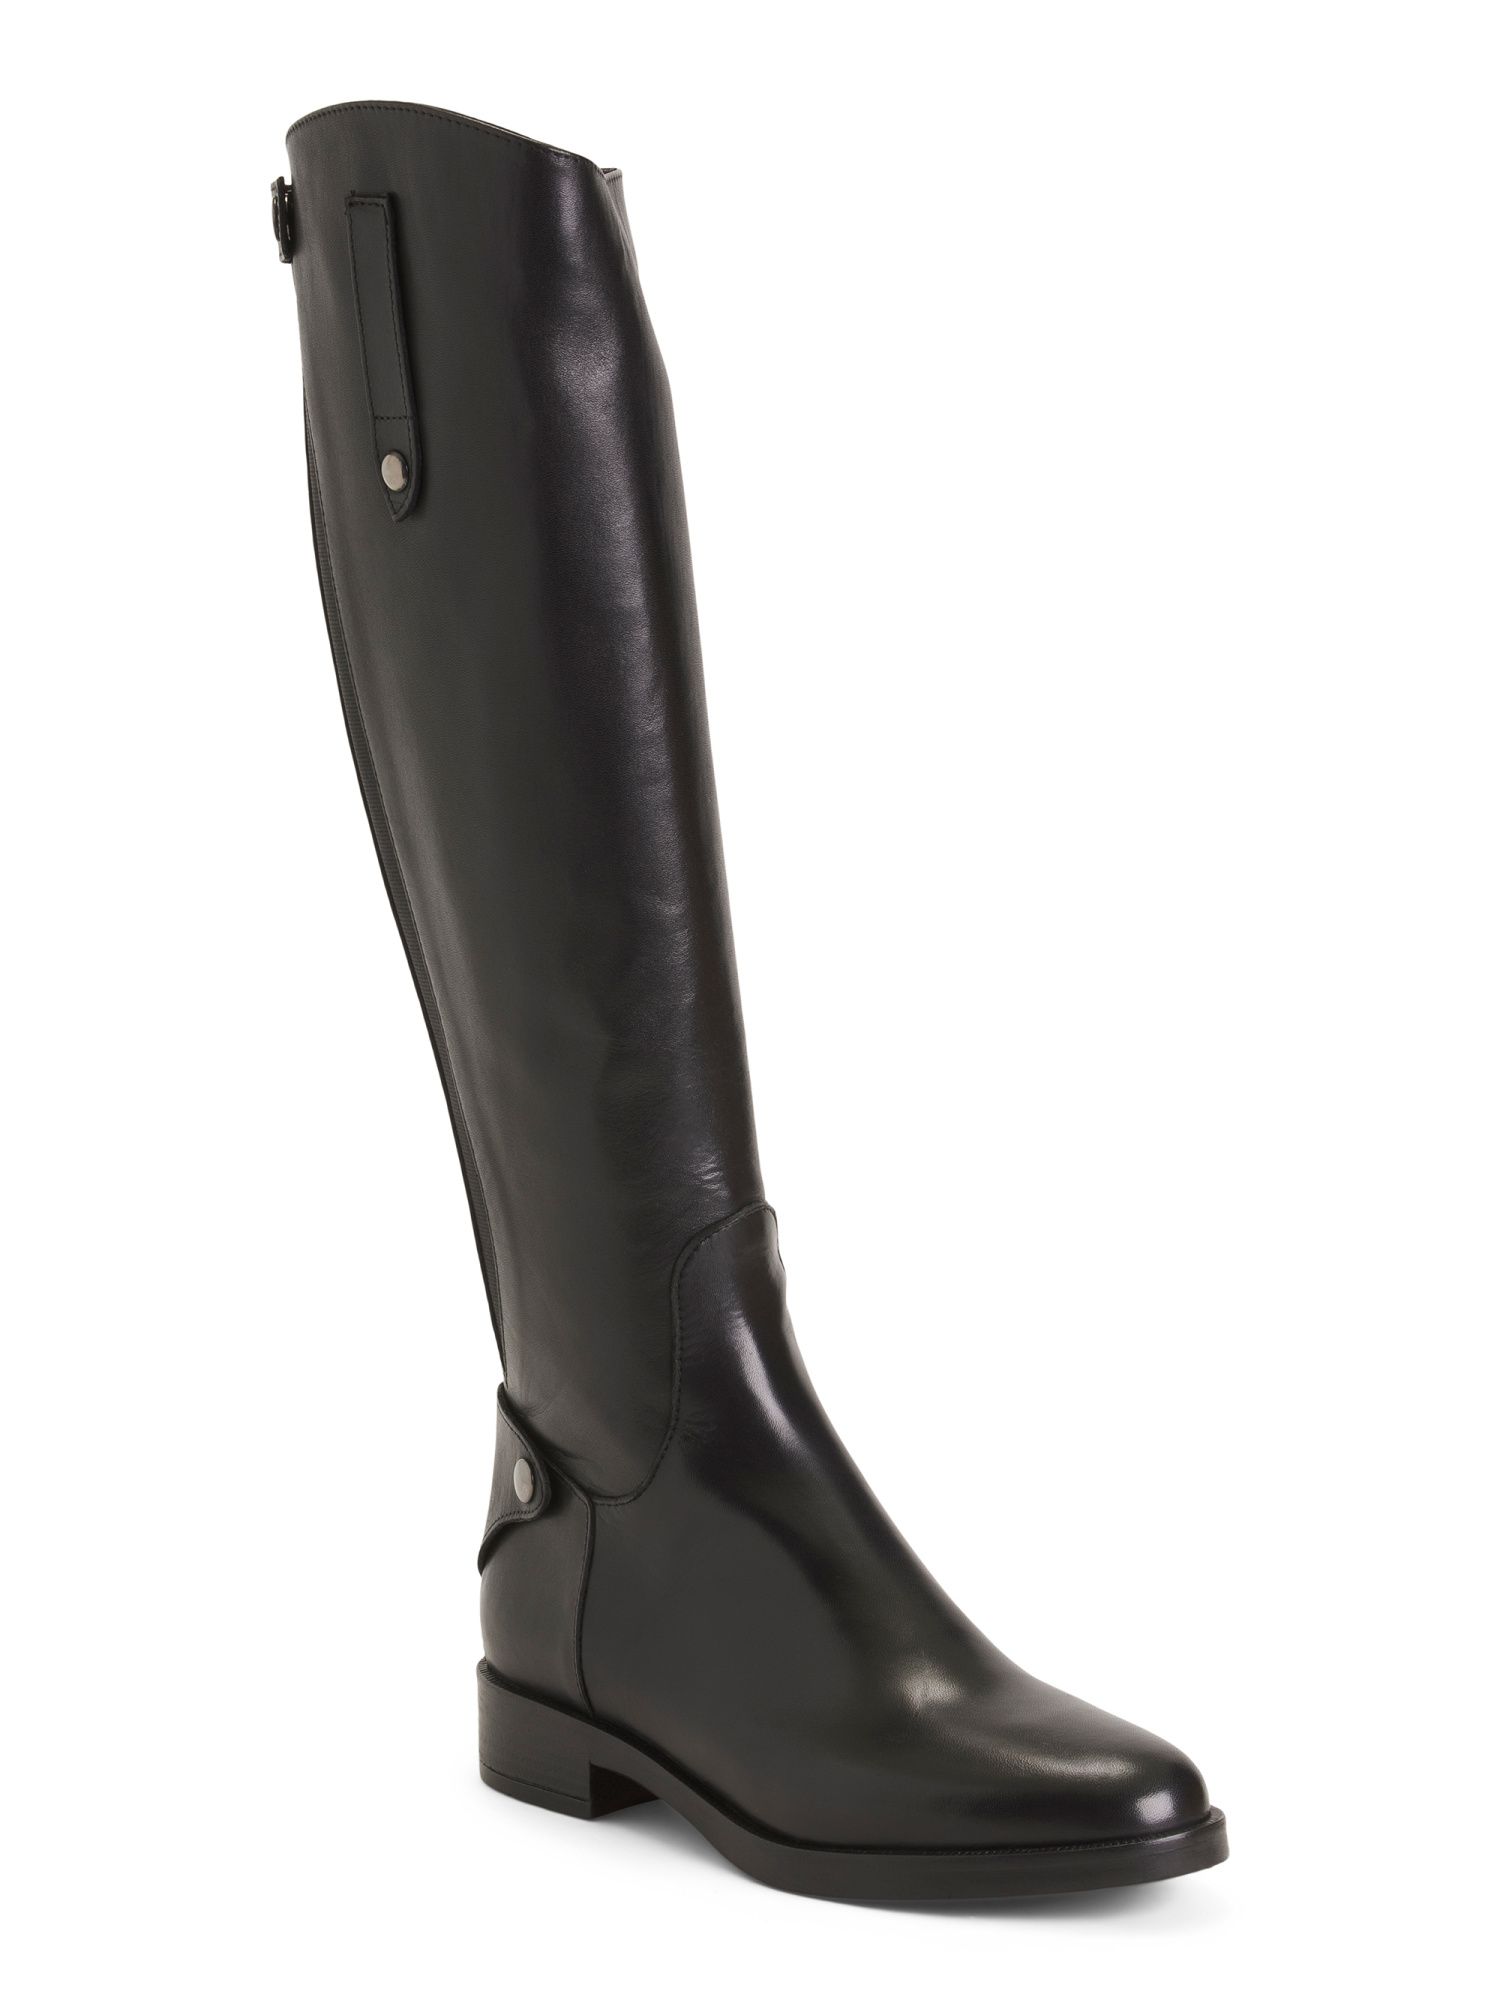 Made In Italy Leather Knee High Riding Boots | TJ Maxx